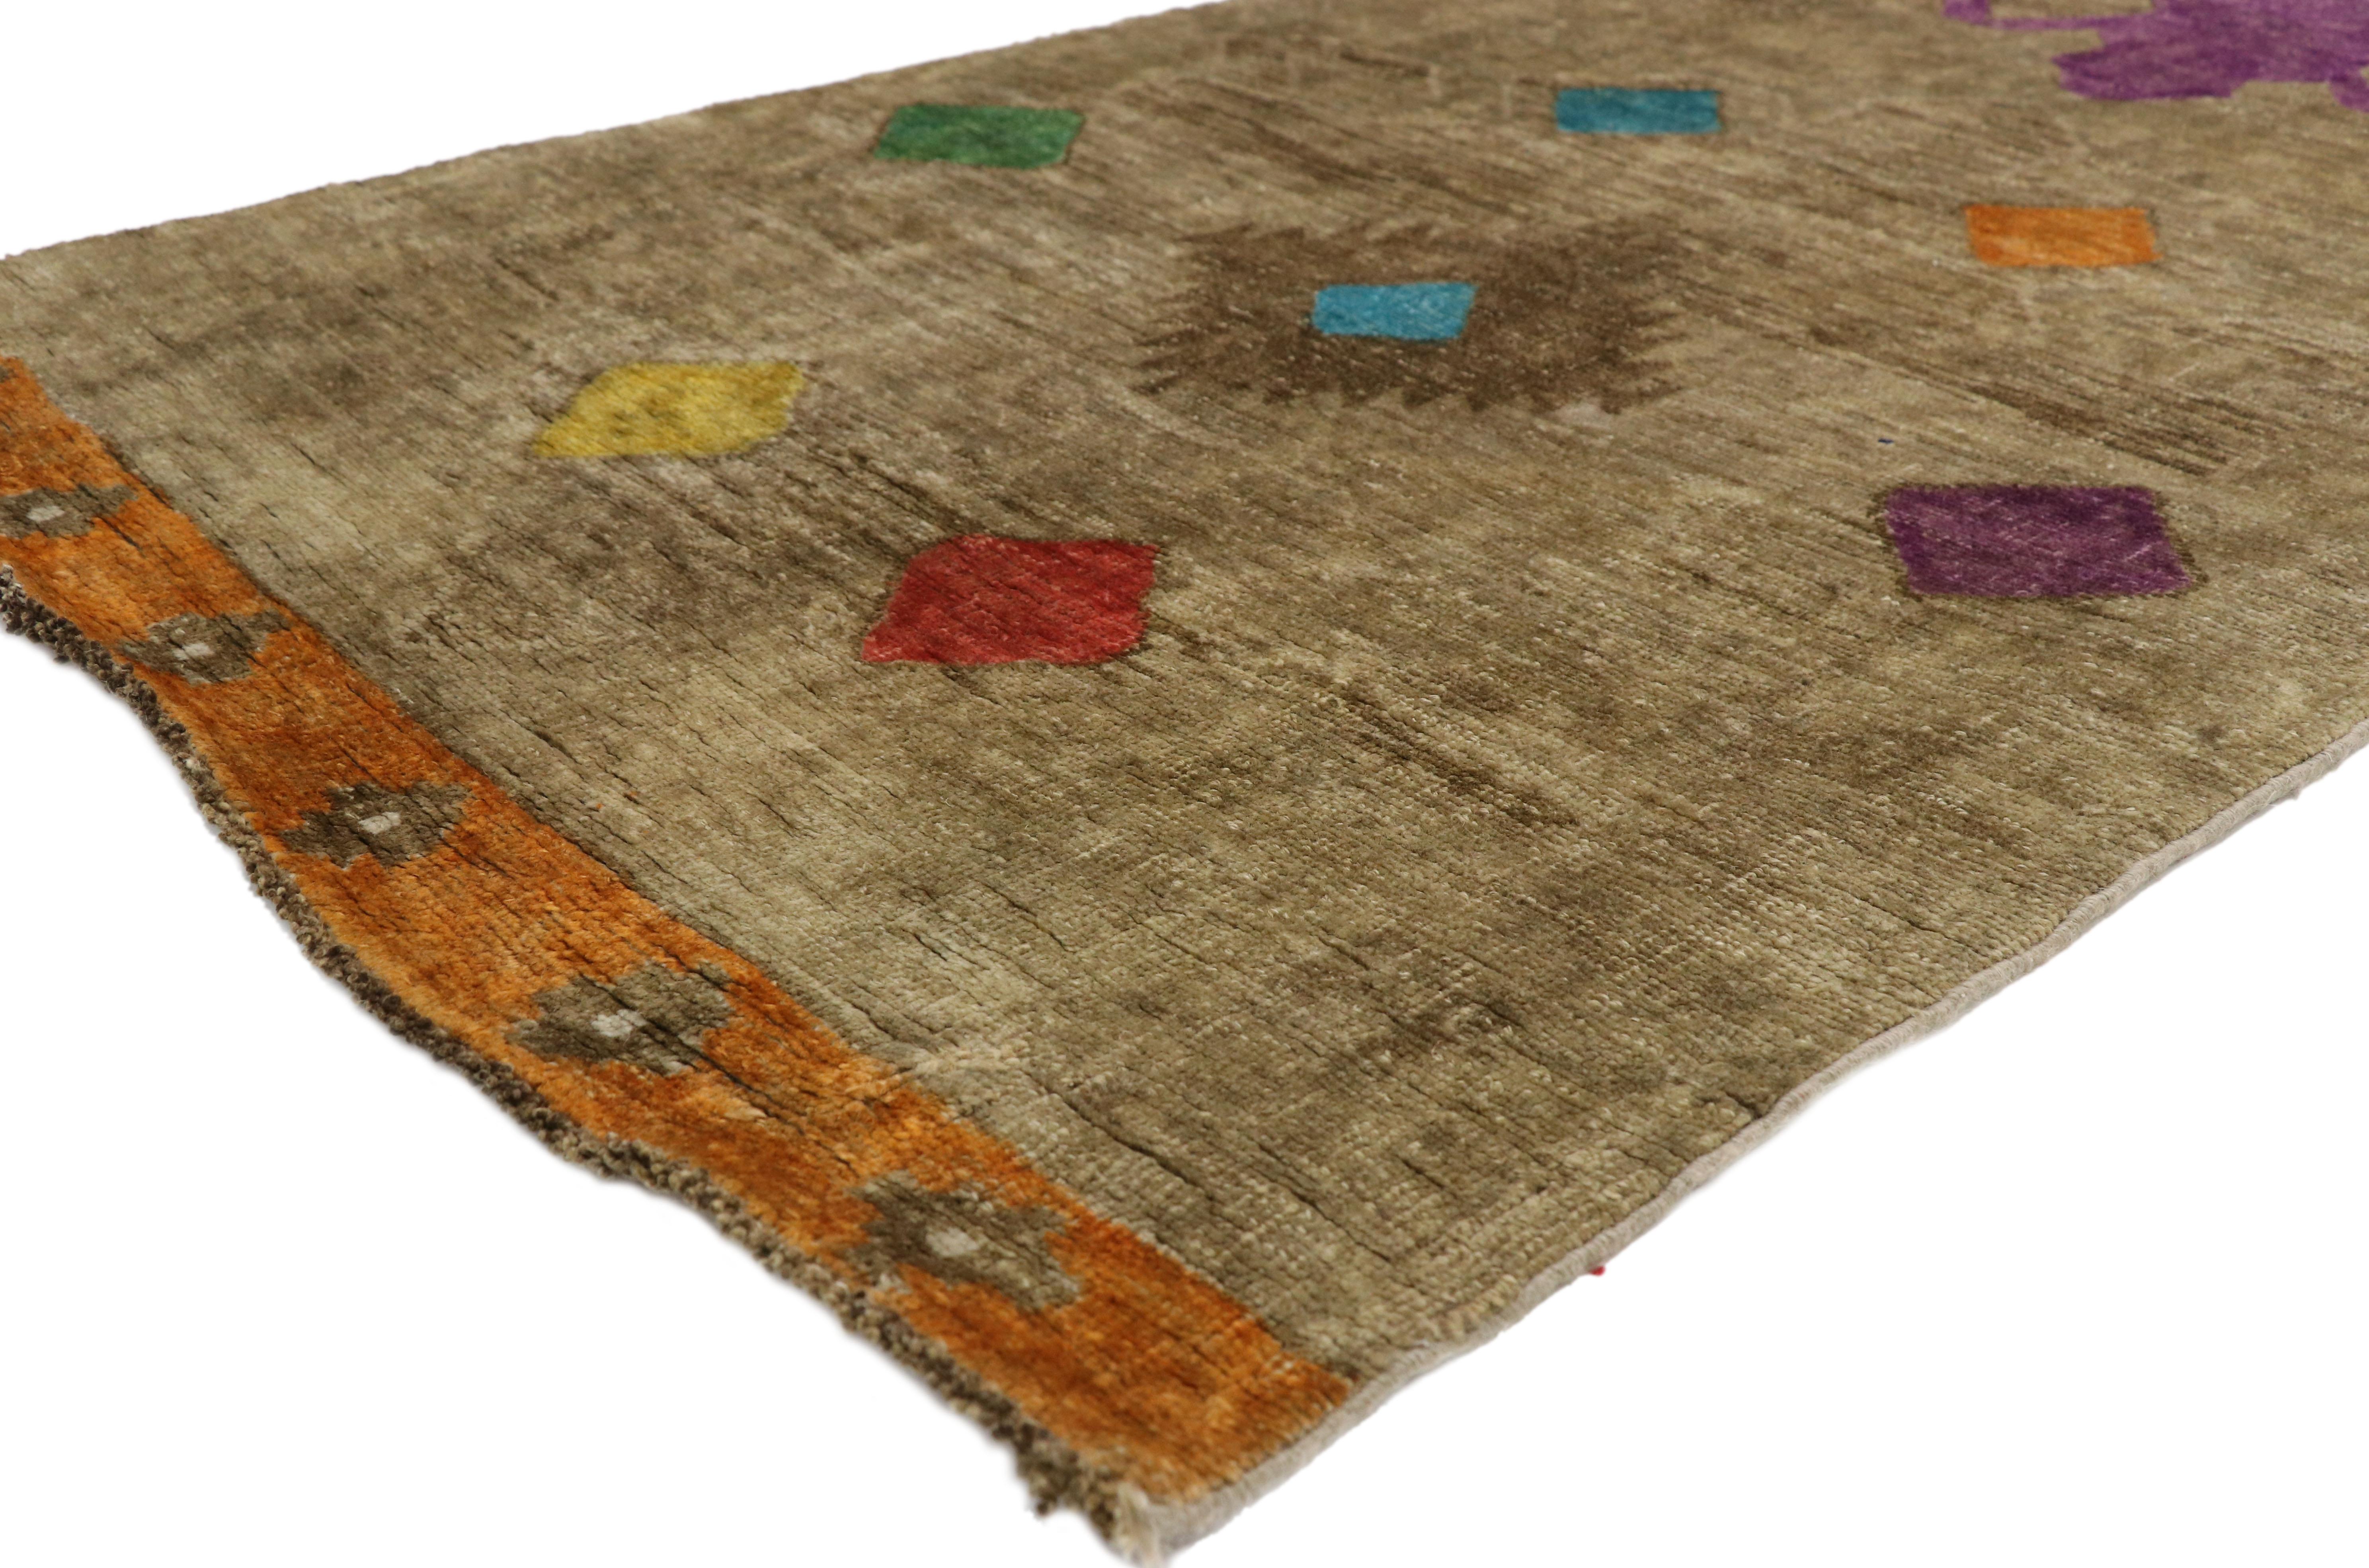 51853 vintage Turkish oushak Runner with Modern contemporary Style 03'04 x 11'03. This hand-knotted wool vintage Turkish Oushak runner with Modern Contemporary style manages to maintain its true mid-century credentials without sacrificing whimsy,